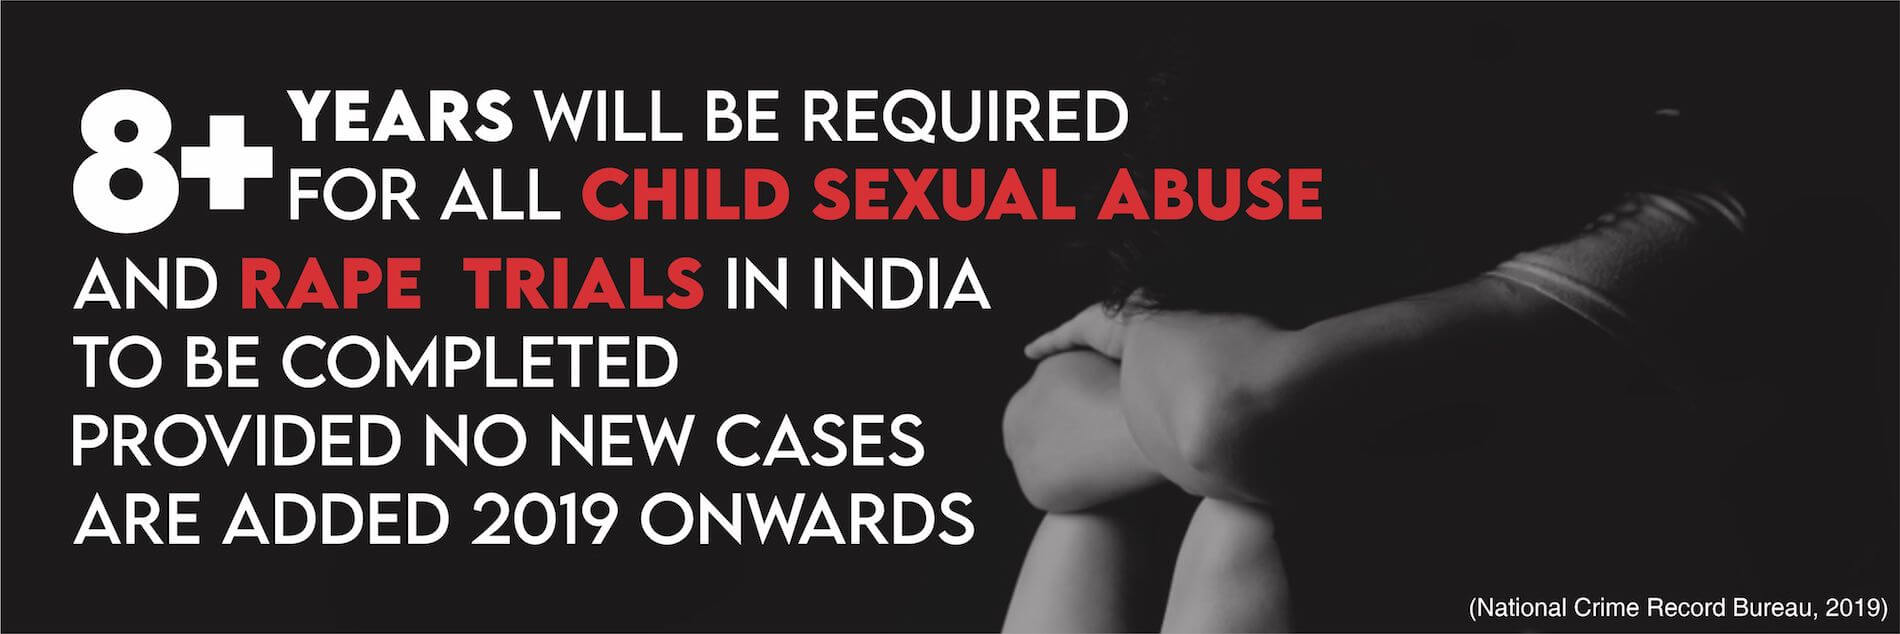 Stop child sexual abuse